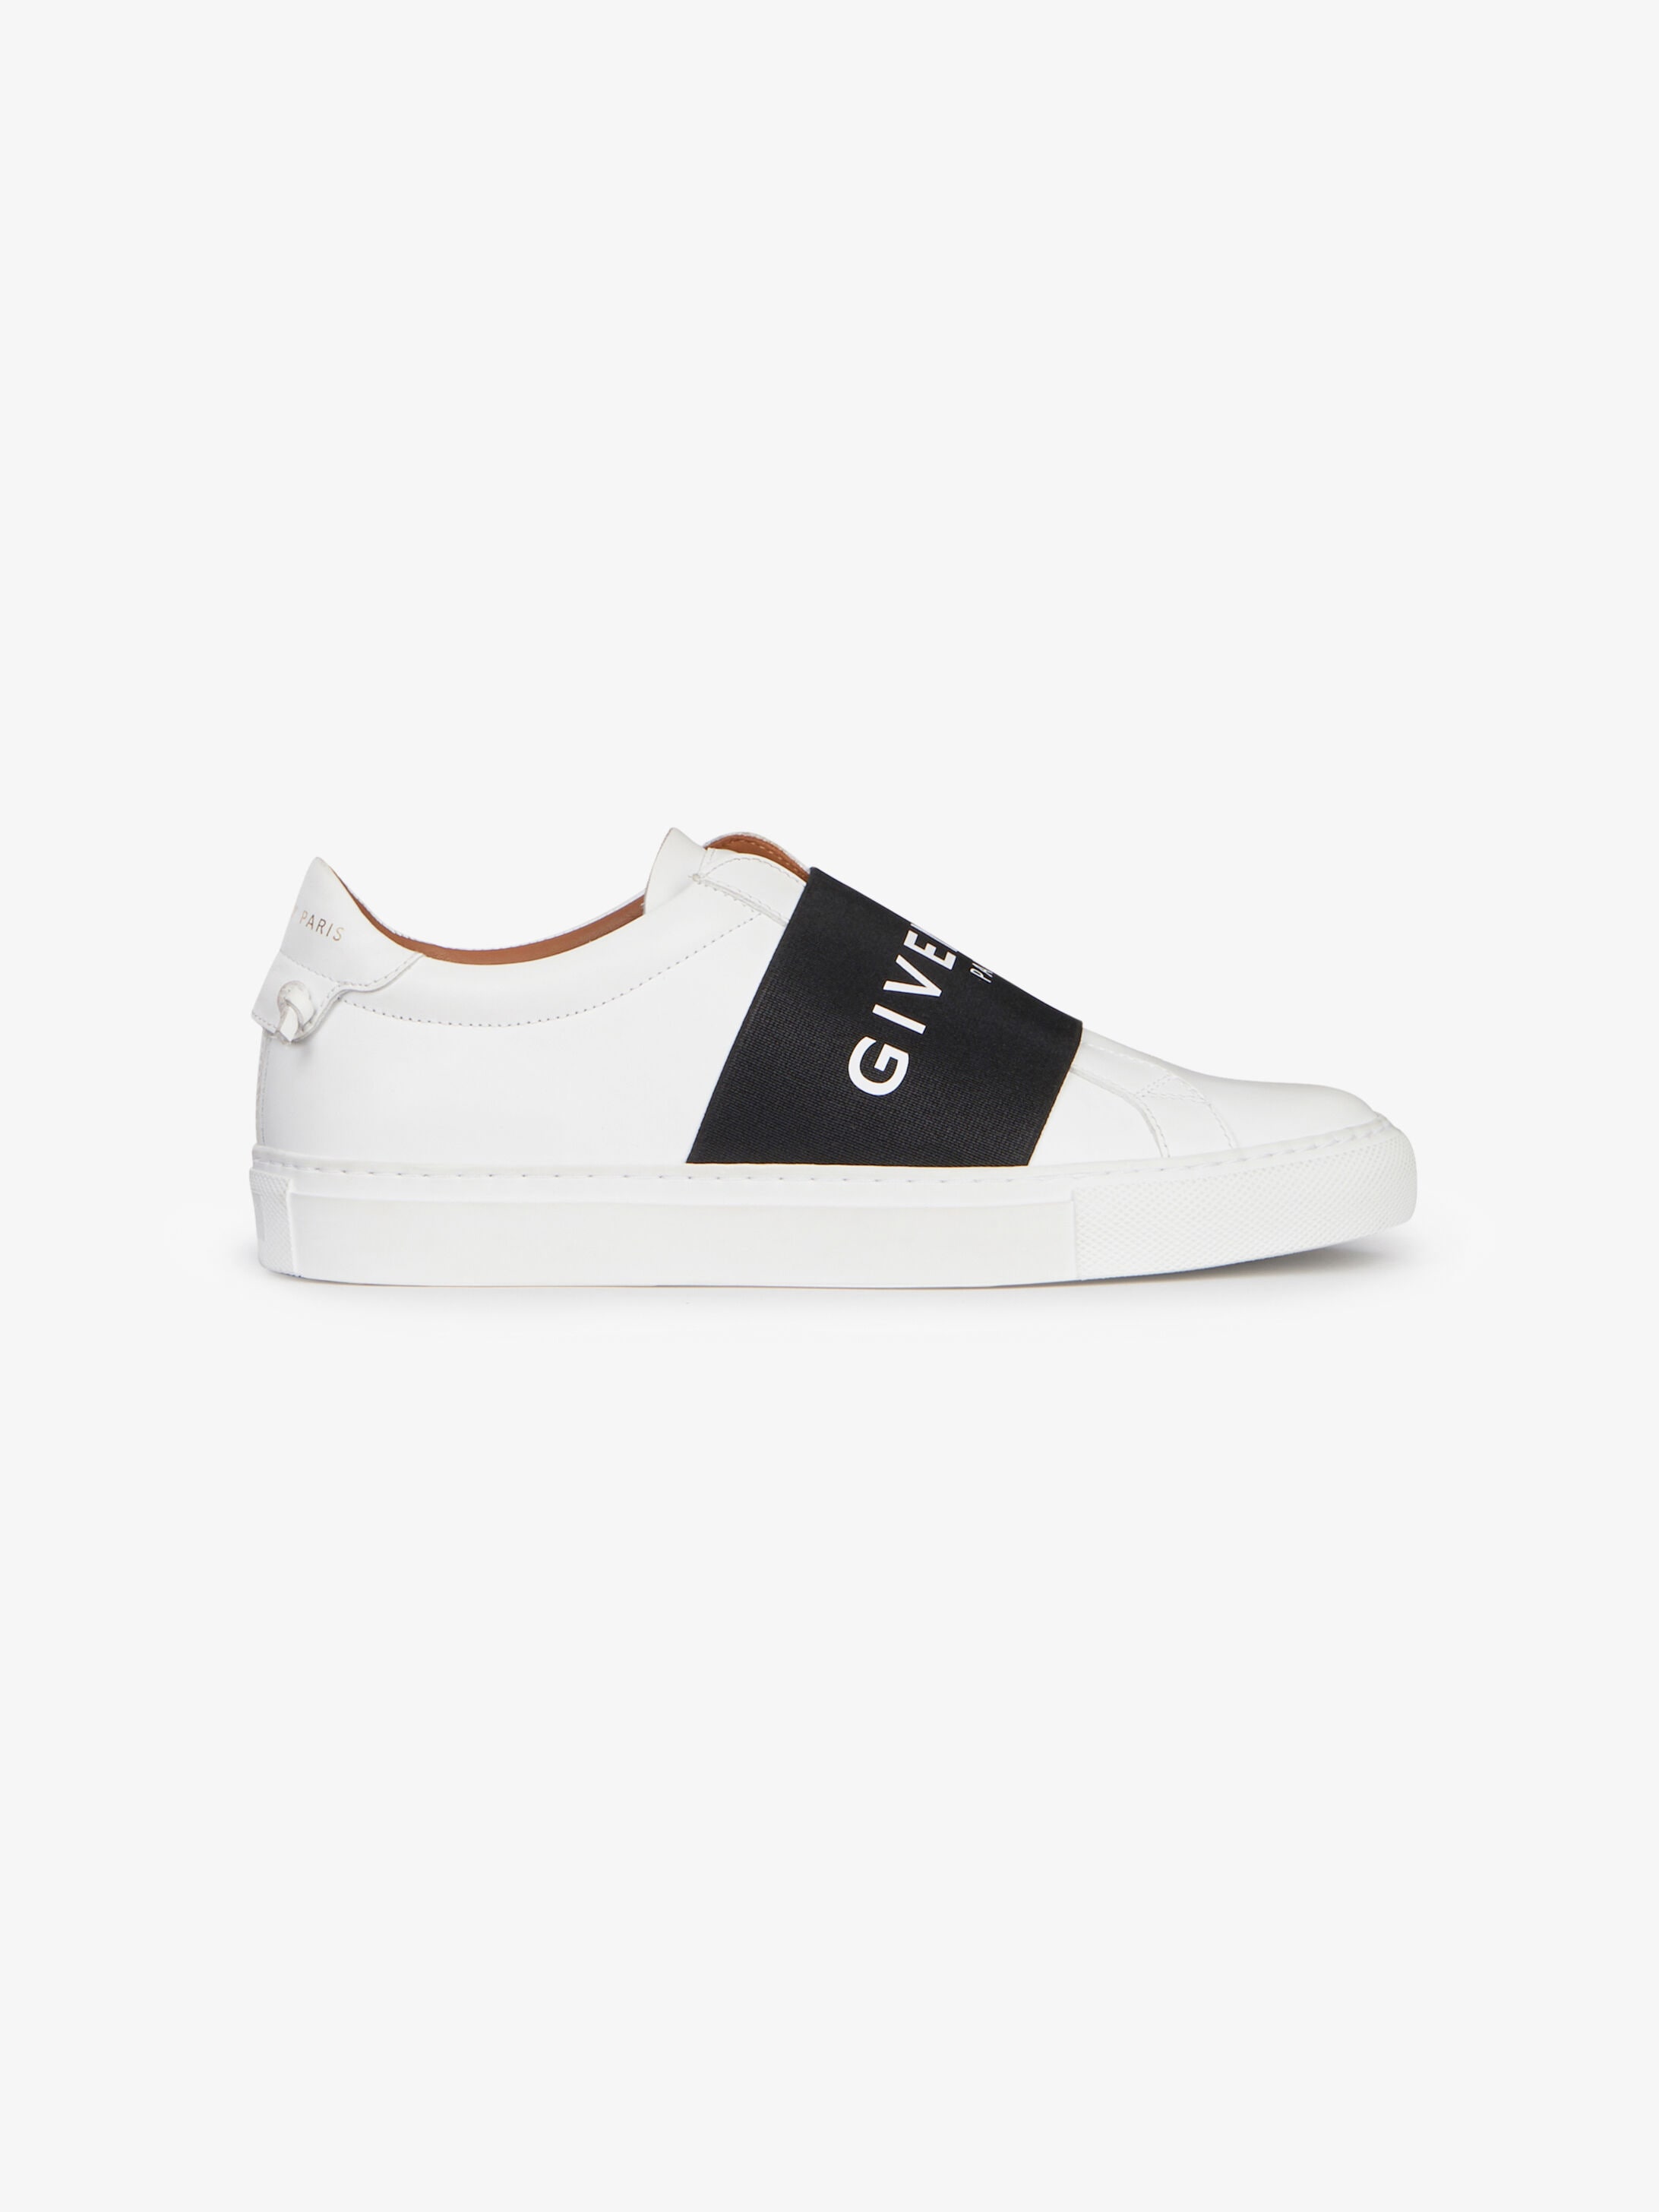 Parity \u003e givenchy shoes sneakers, Up to 